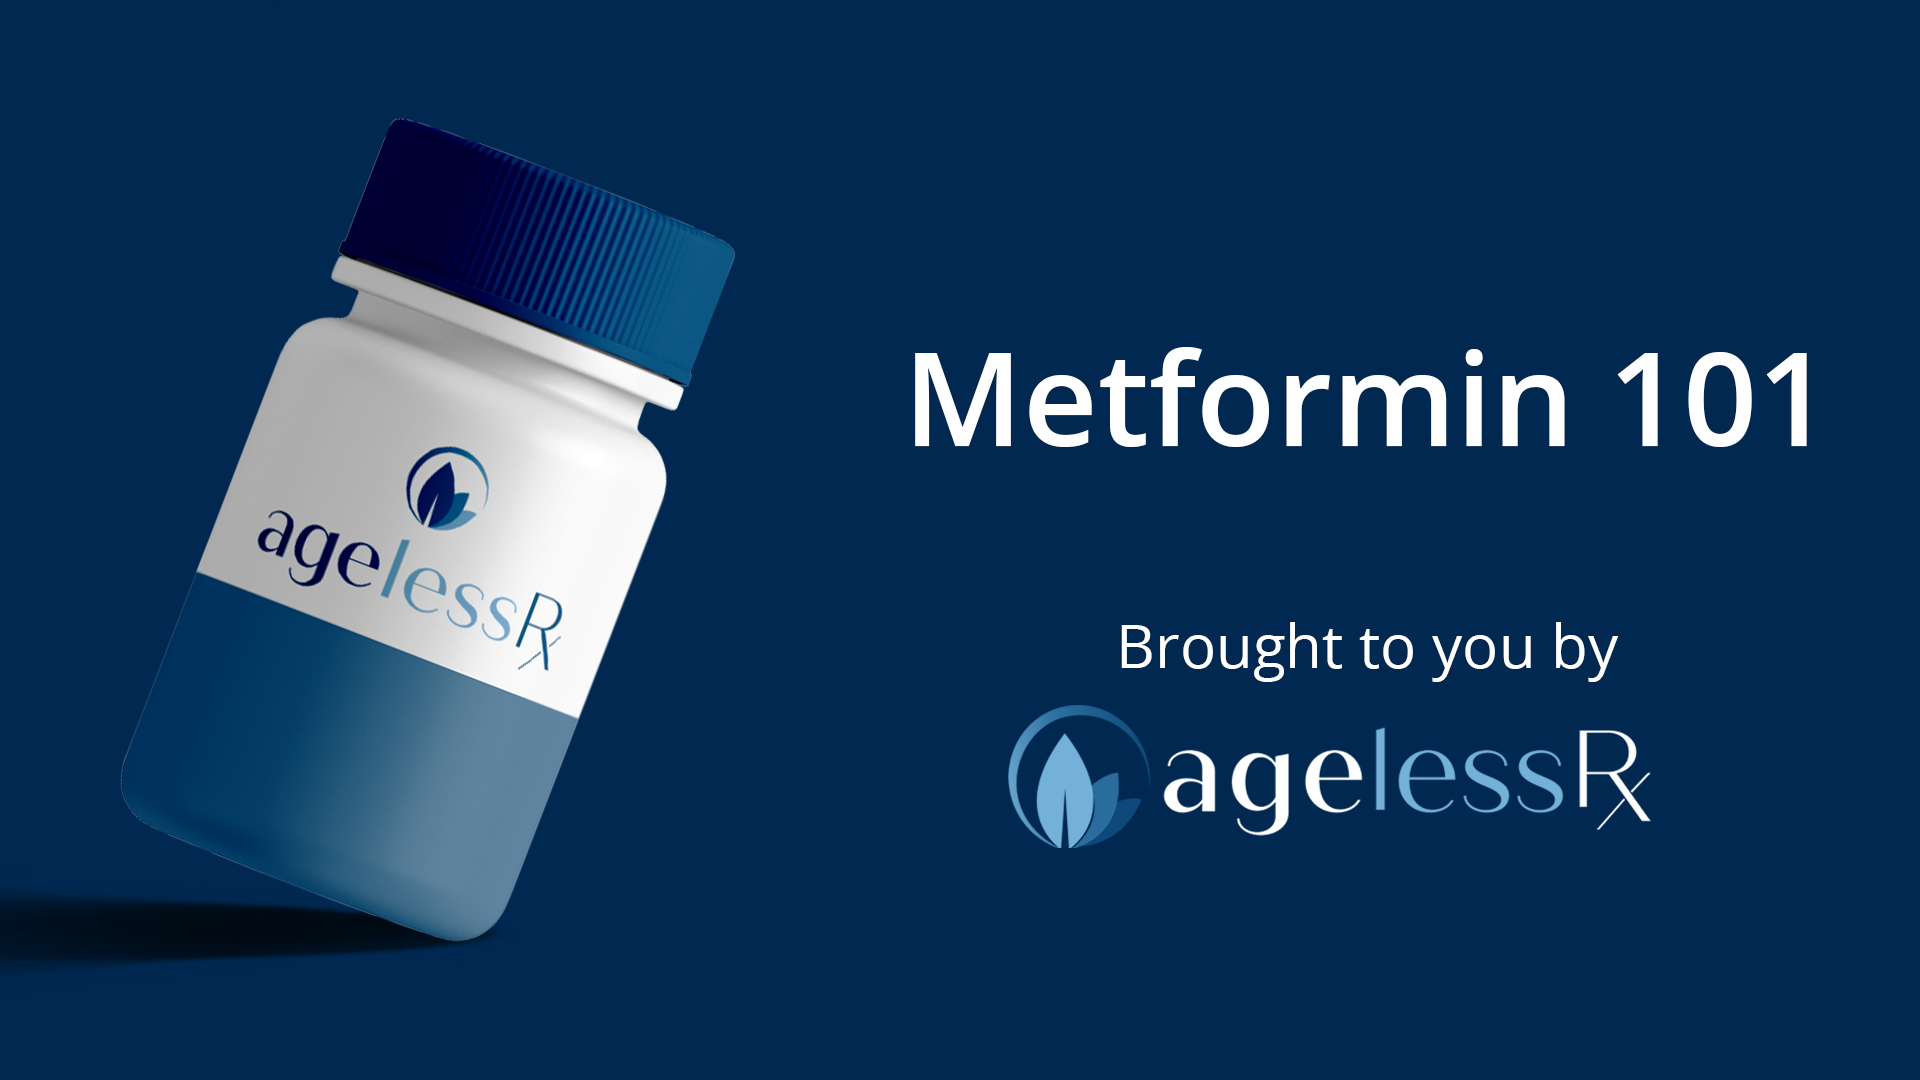 Thumbnail image for the blog post: 101 Video: What is Metformin?